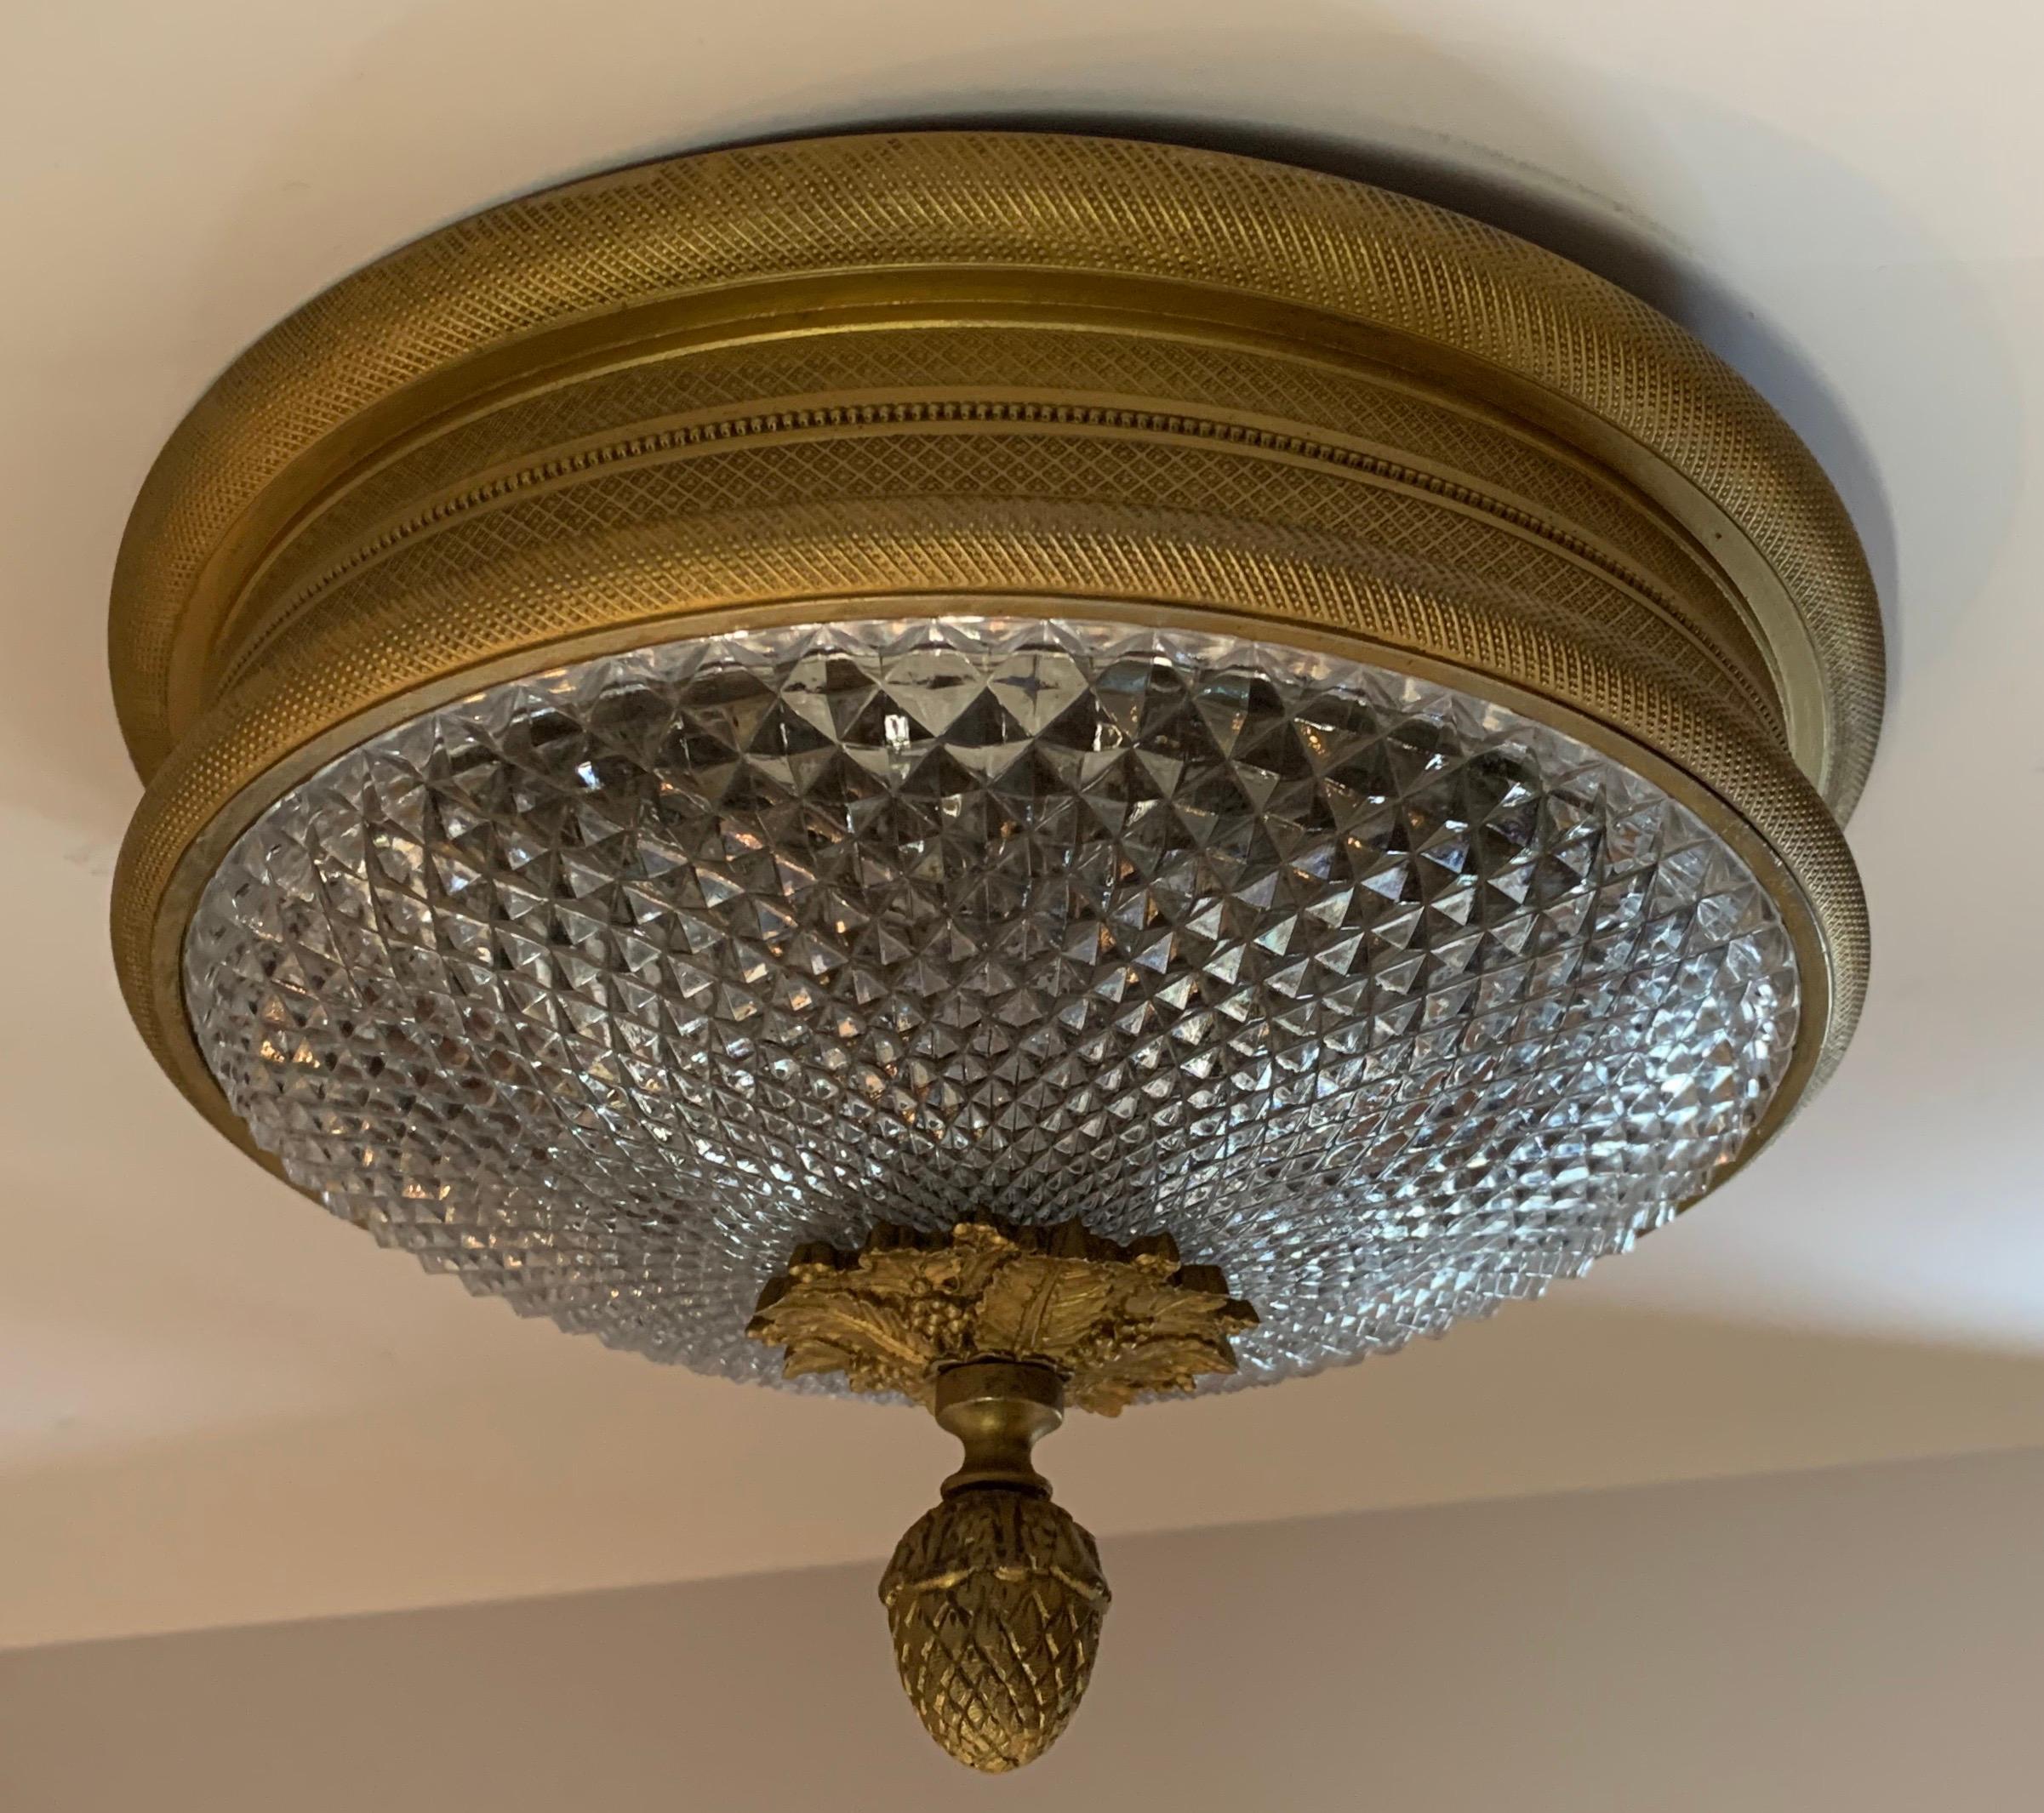 A wonderful neoclassical set of 3 Sherle Wagner vintage knurled ceiling lights in doré bronze gold patina. These low profile two-light fixtures (max 60watts per socket) are perfect for lower ceiling applications. This beautiful flush mount is finish